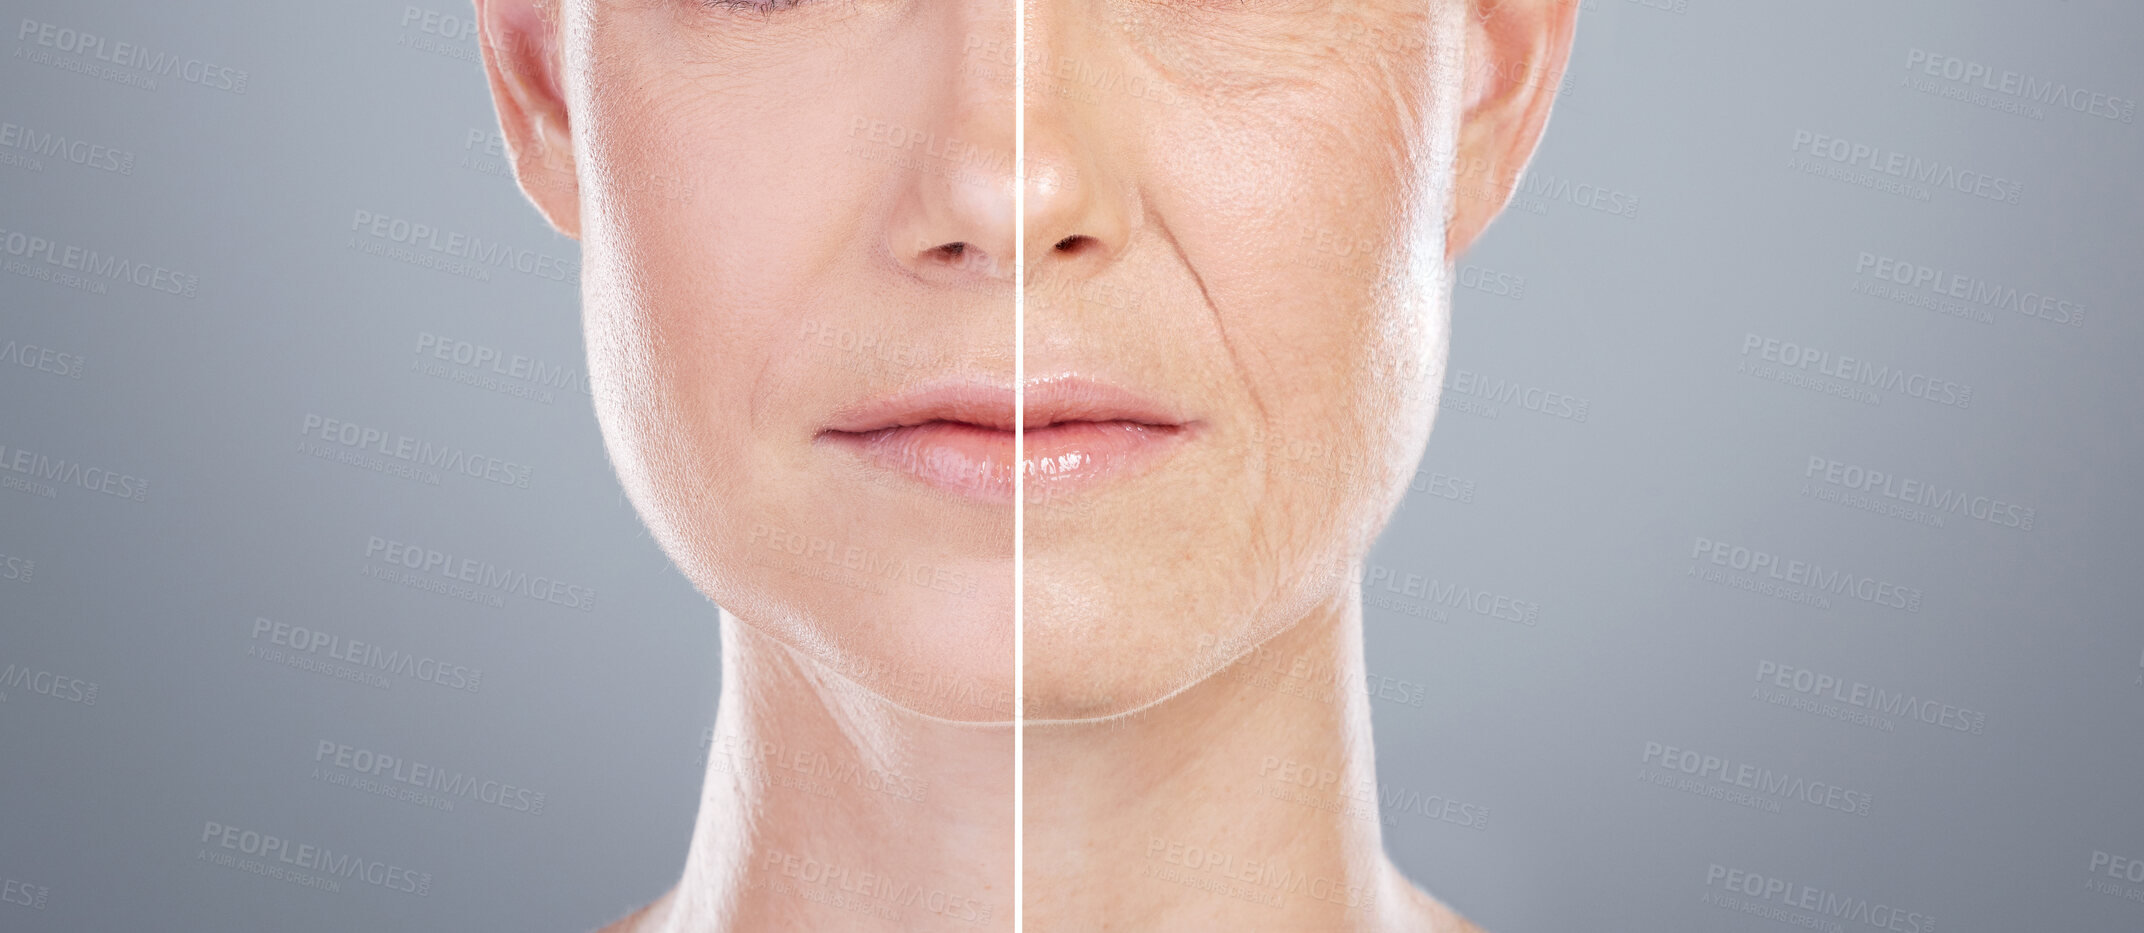 Buy stock photo Studio shot of an unrecognisable woman's face split into two sides against a grey background